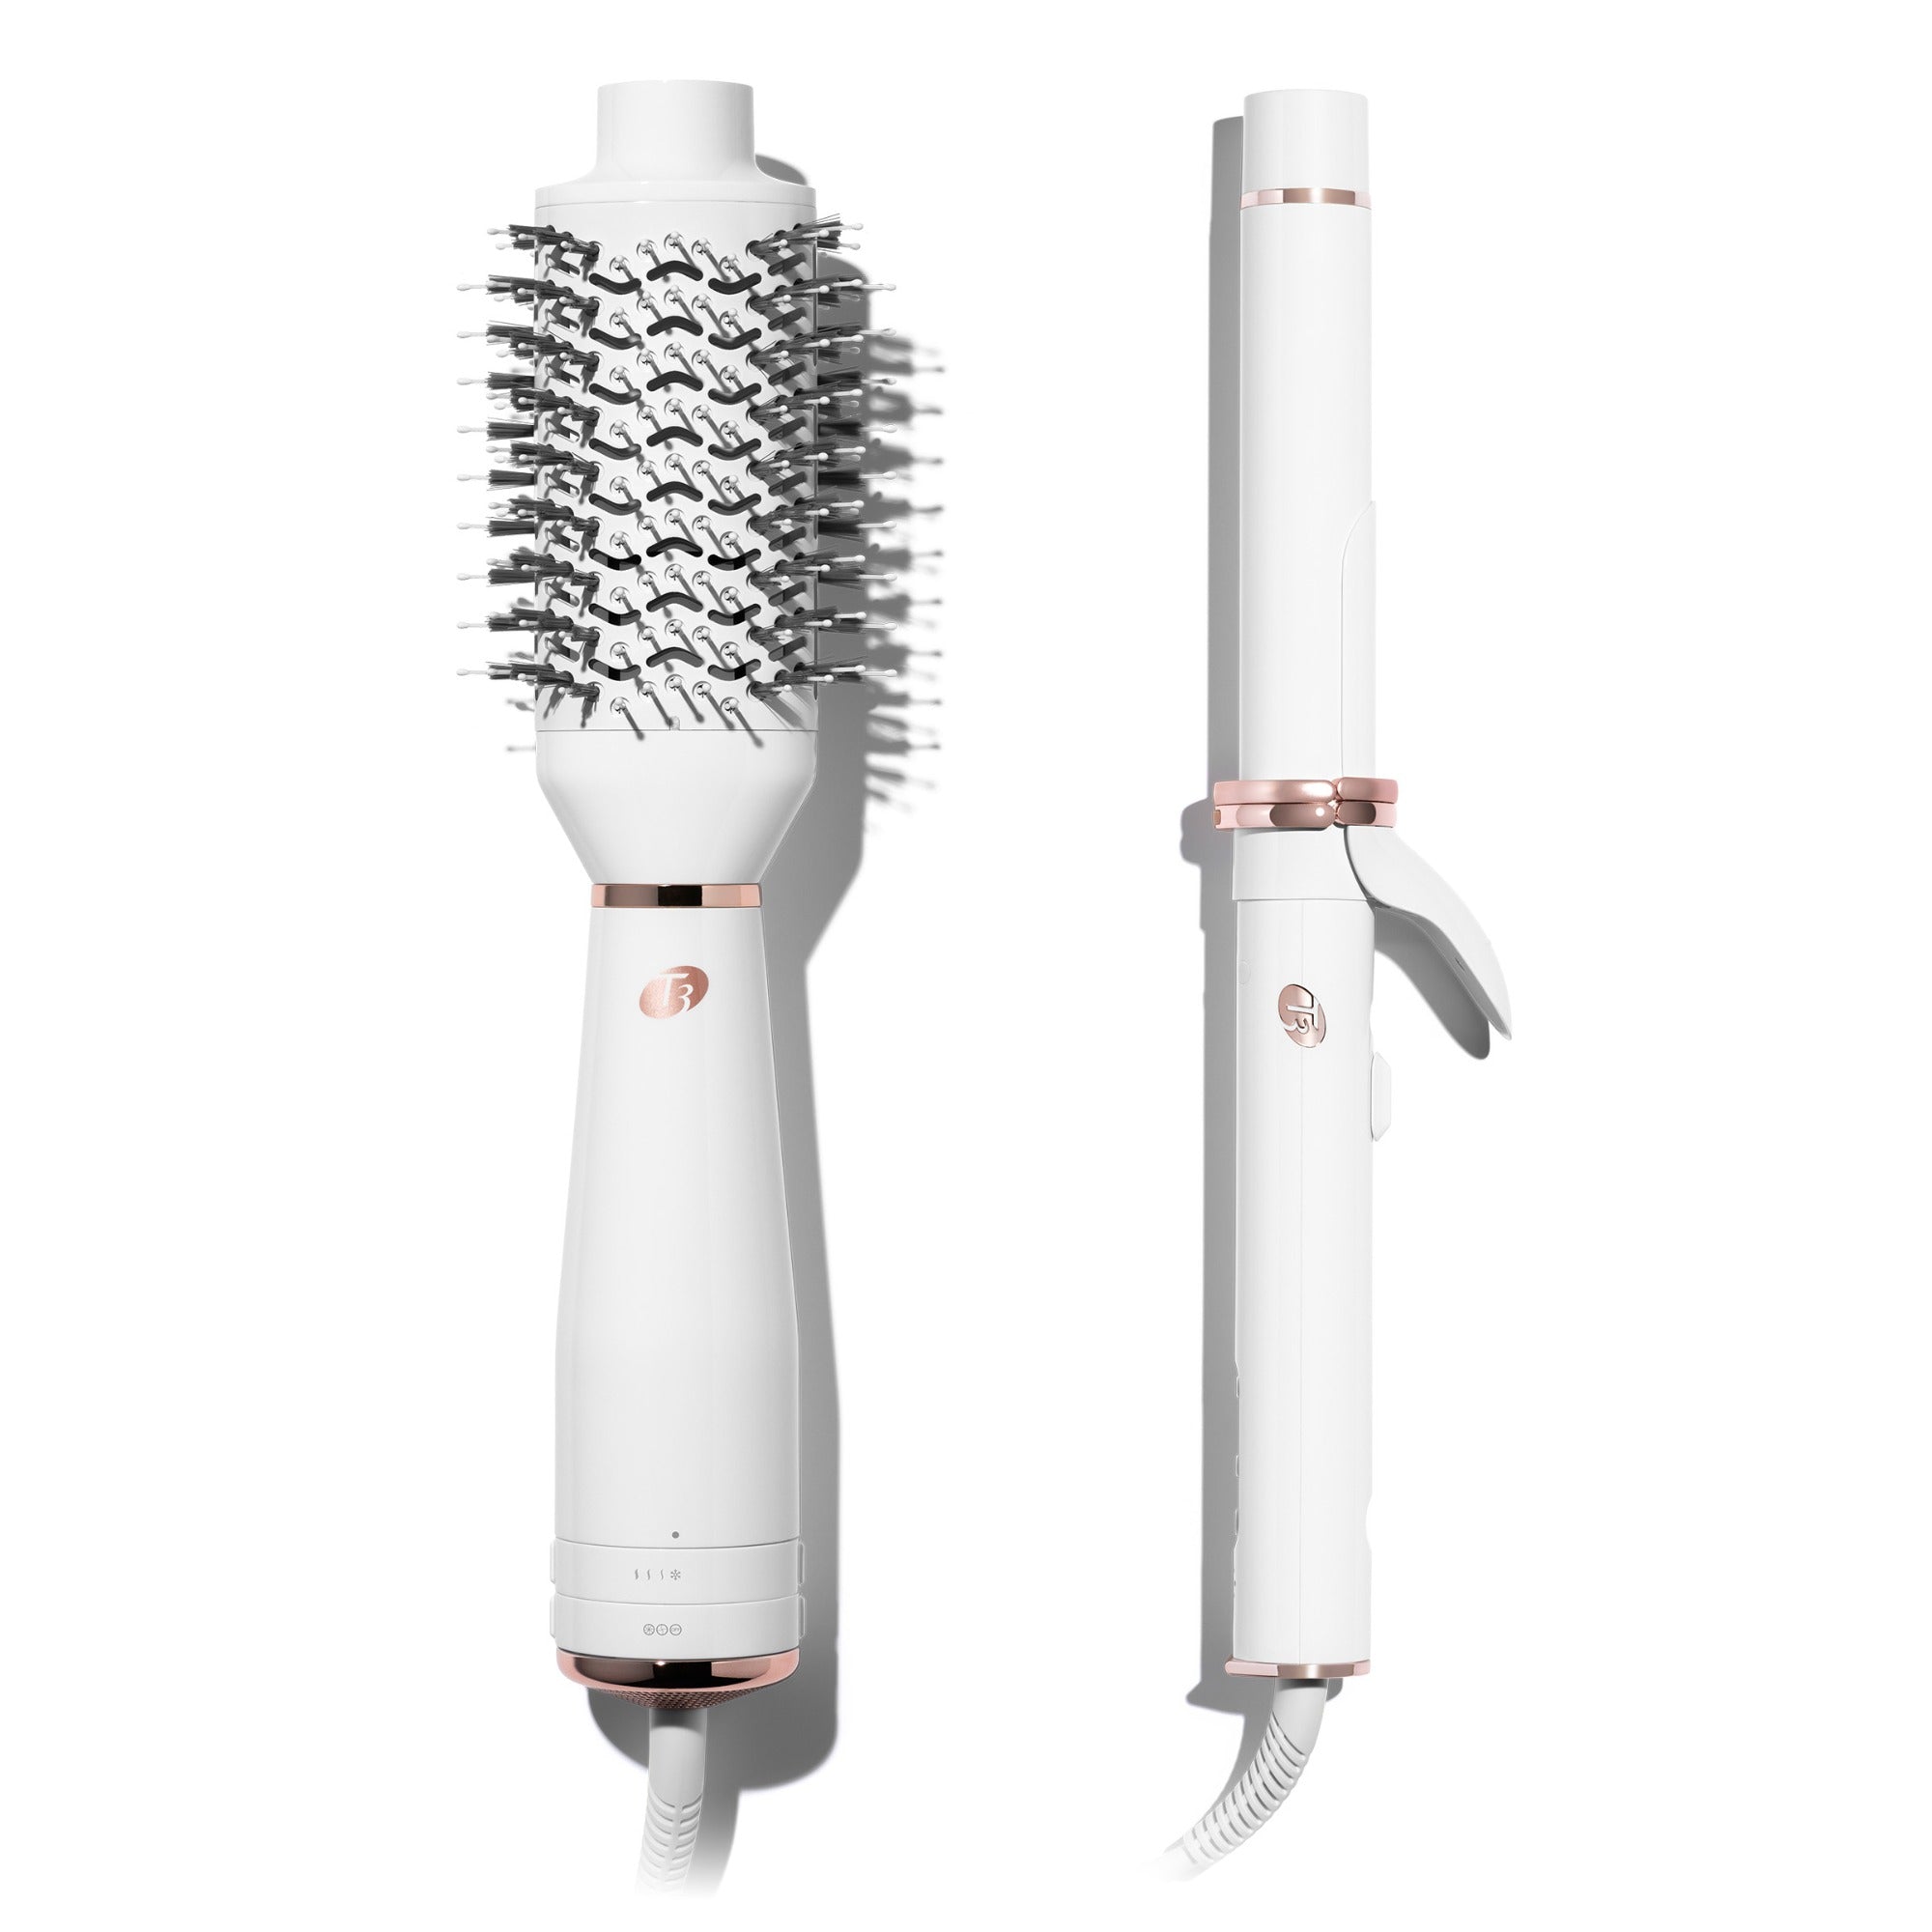 Salon Style at Home Set with T3 AireBrush and T3 CurlWrap